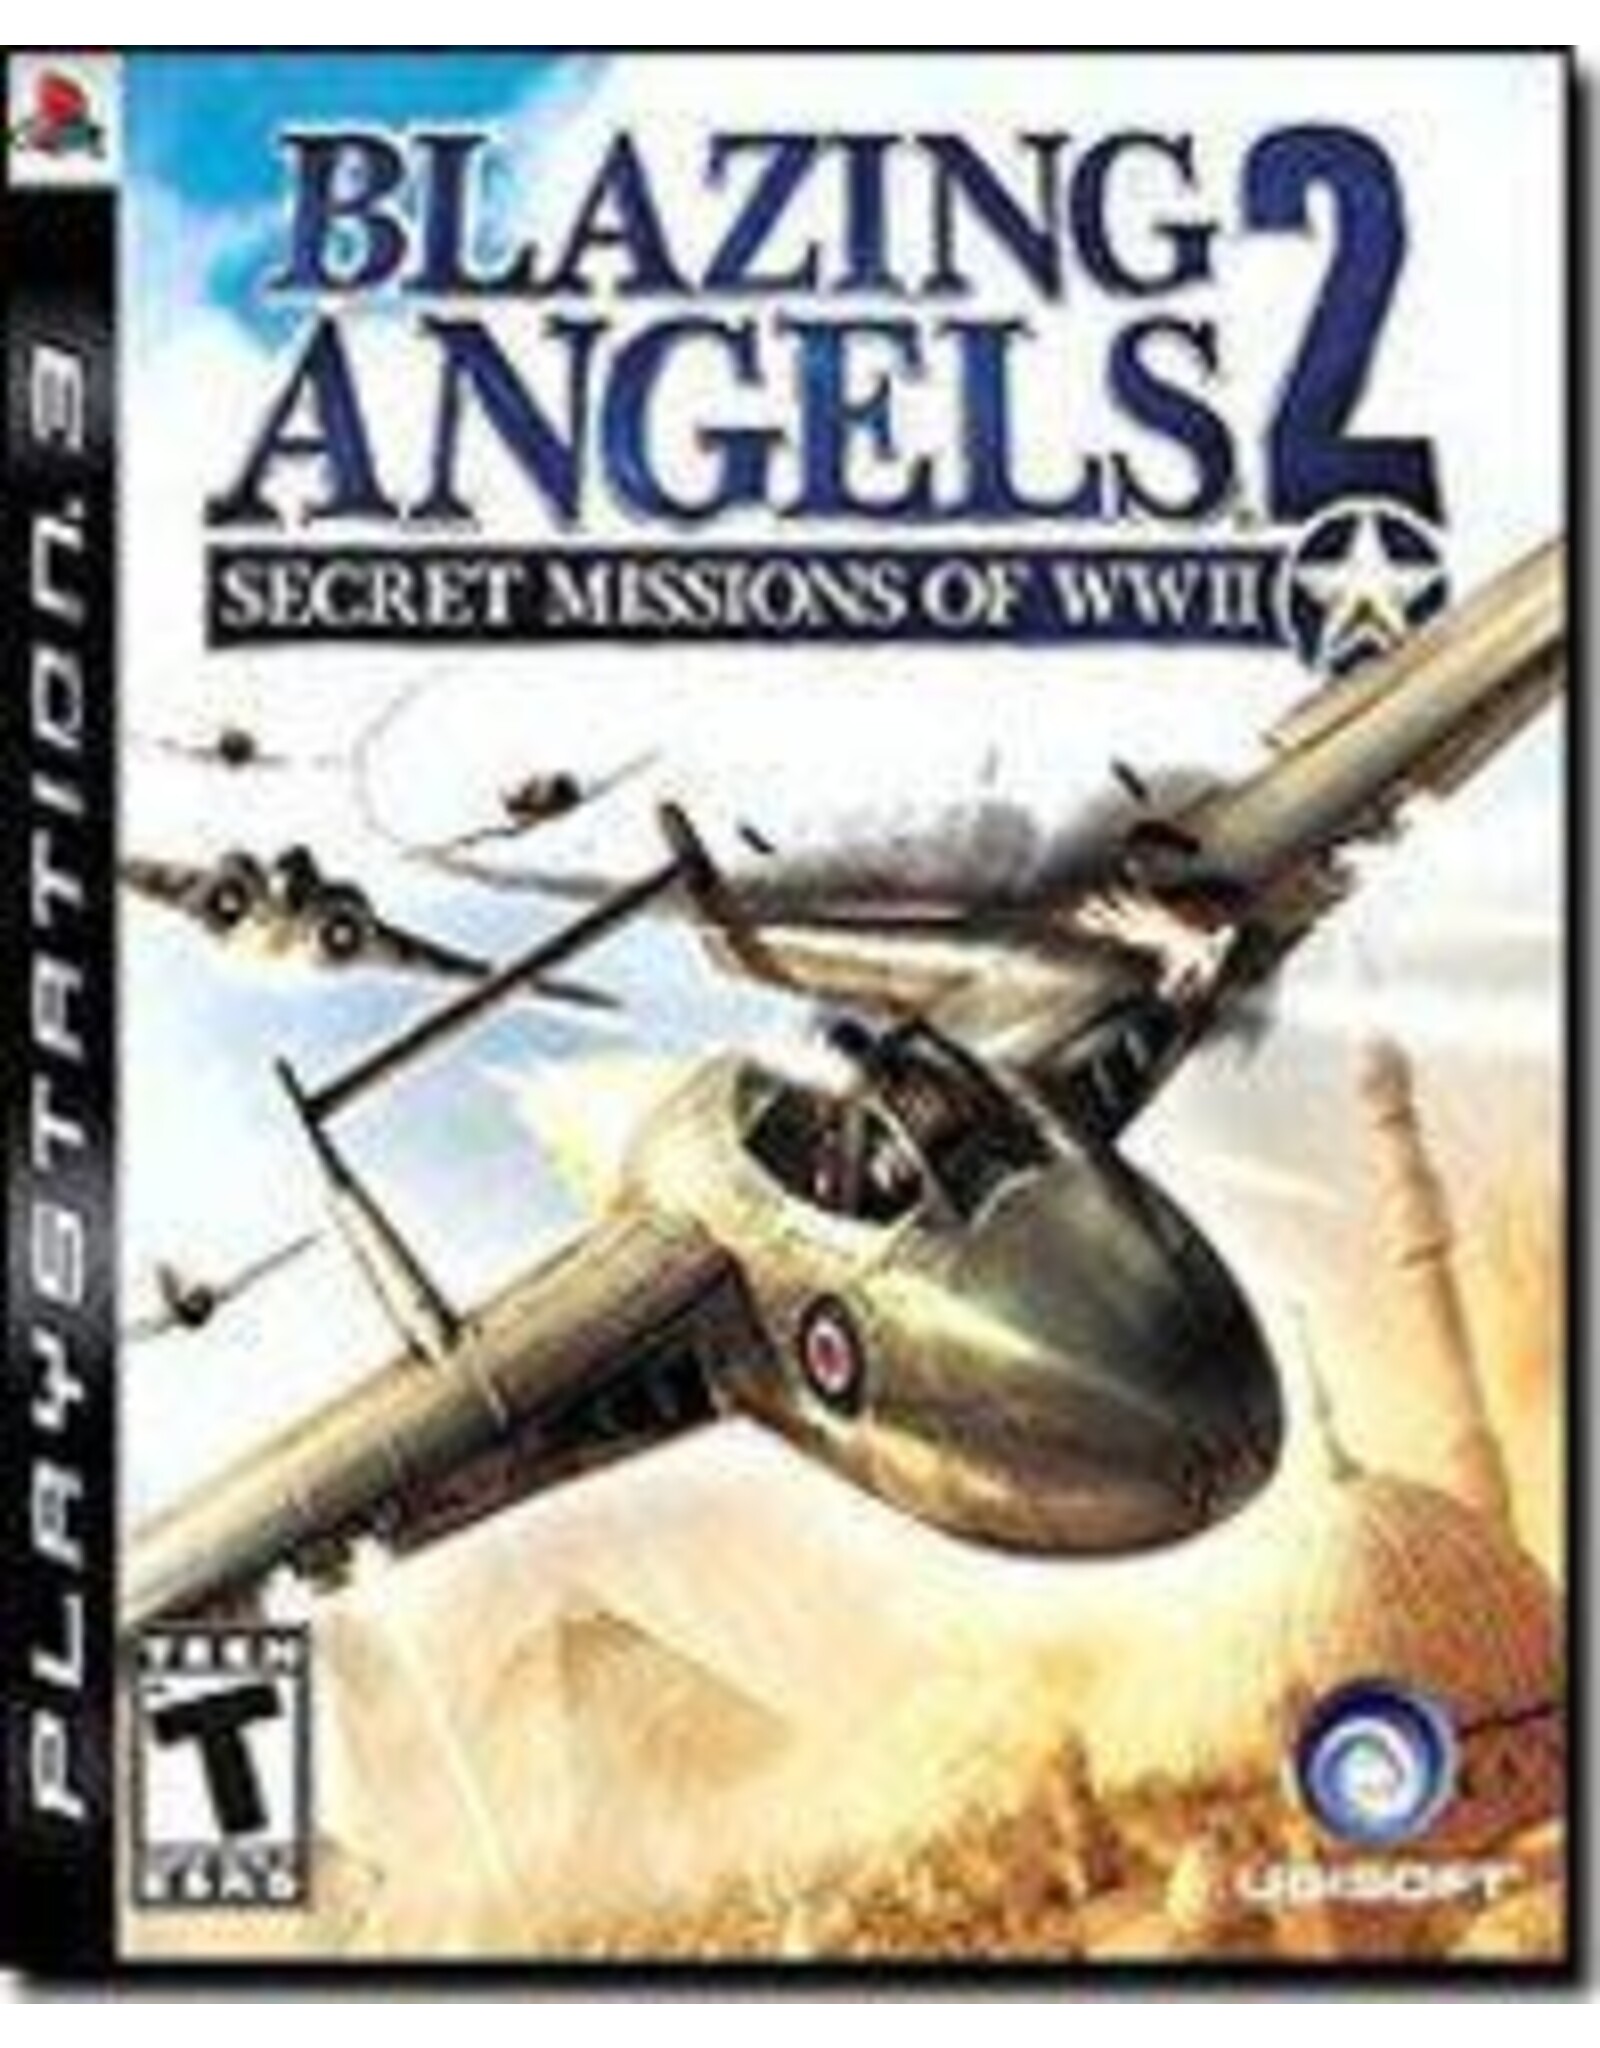 Playstation 3 Blazing Angels 2 Secret Missions of WWII (No Manual)